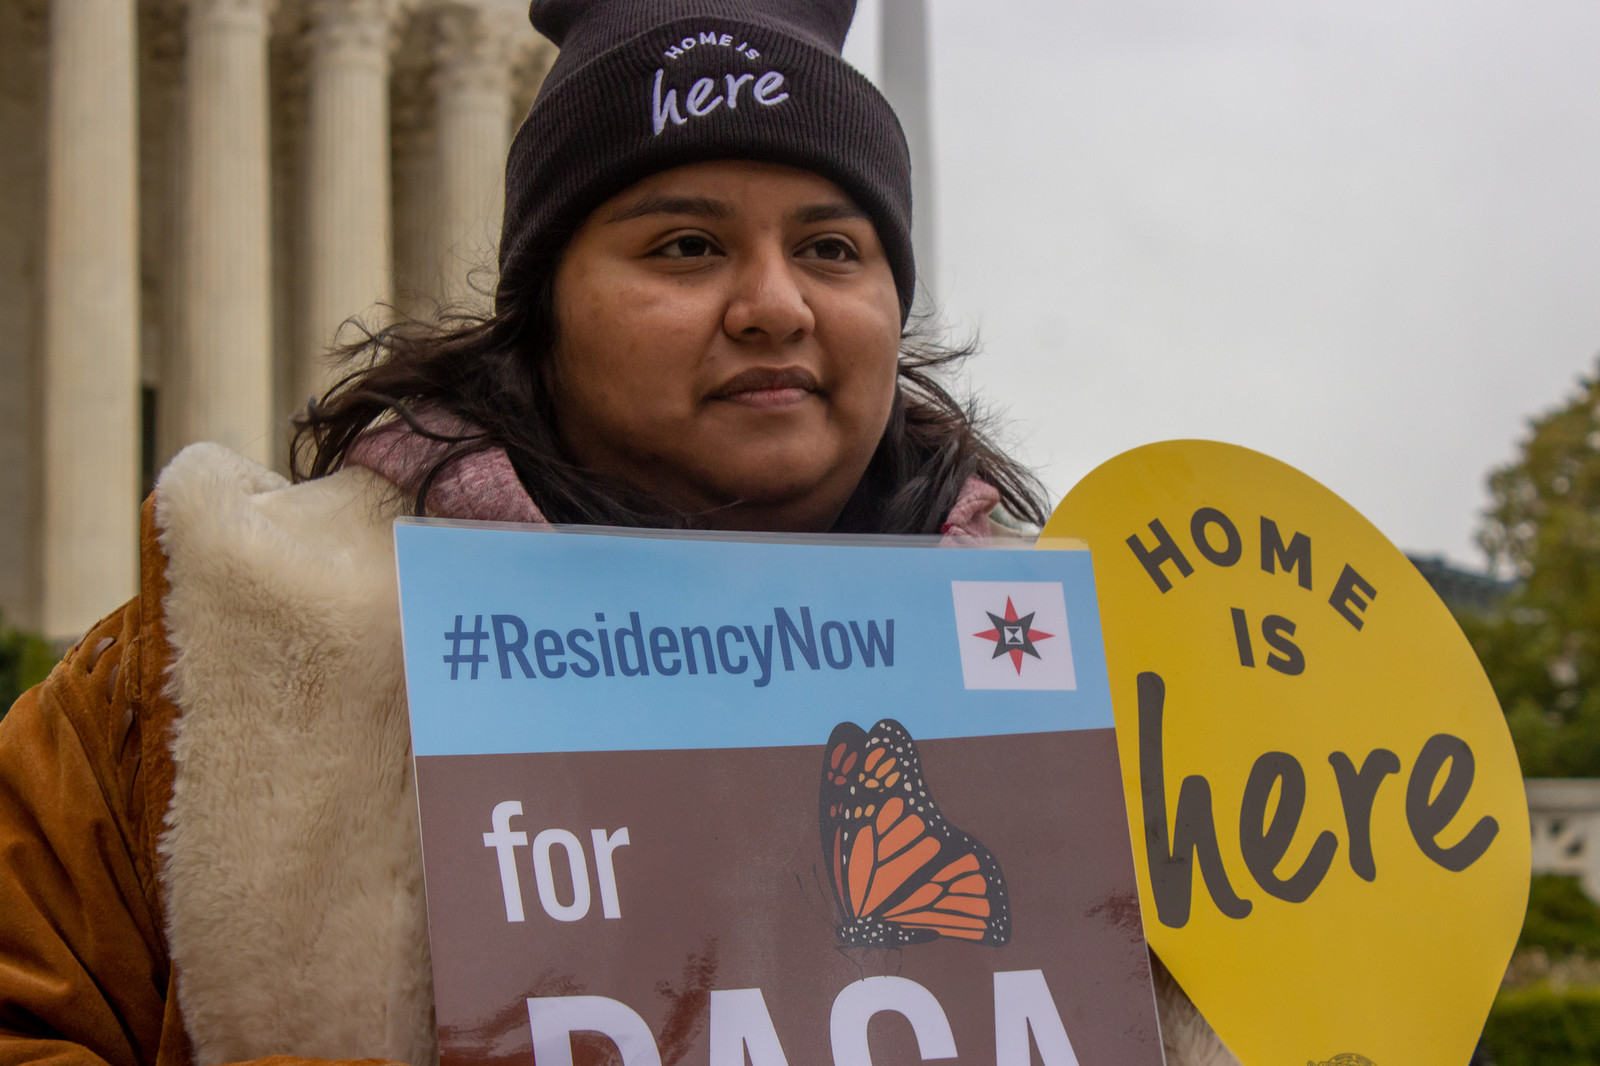 The DACA decision gives me hope of seeing my loved ones again